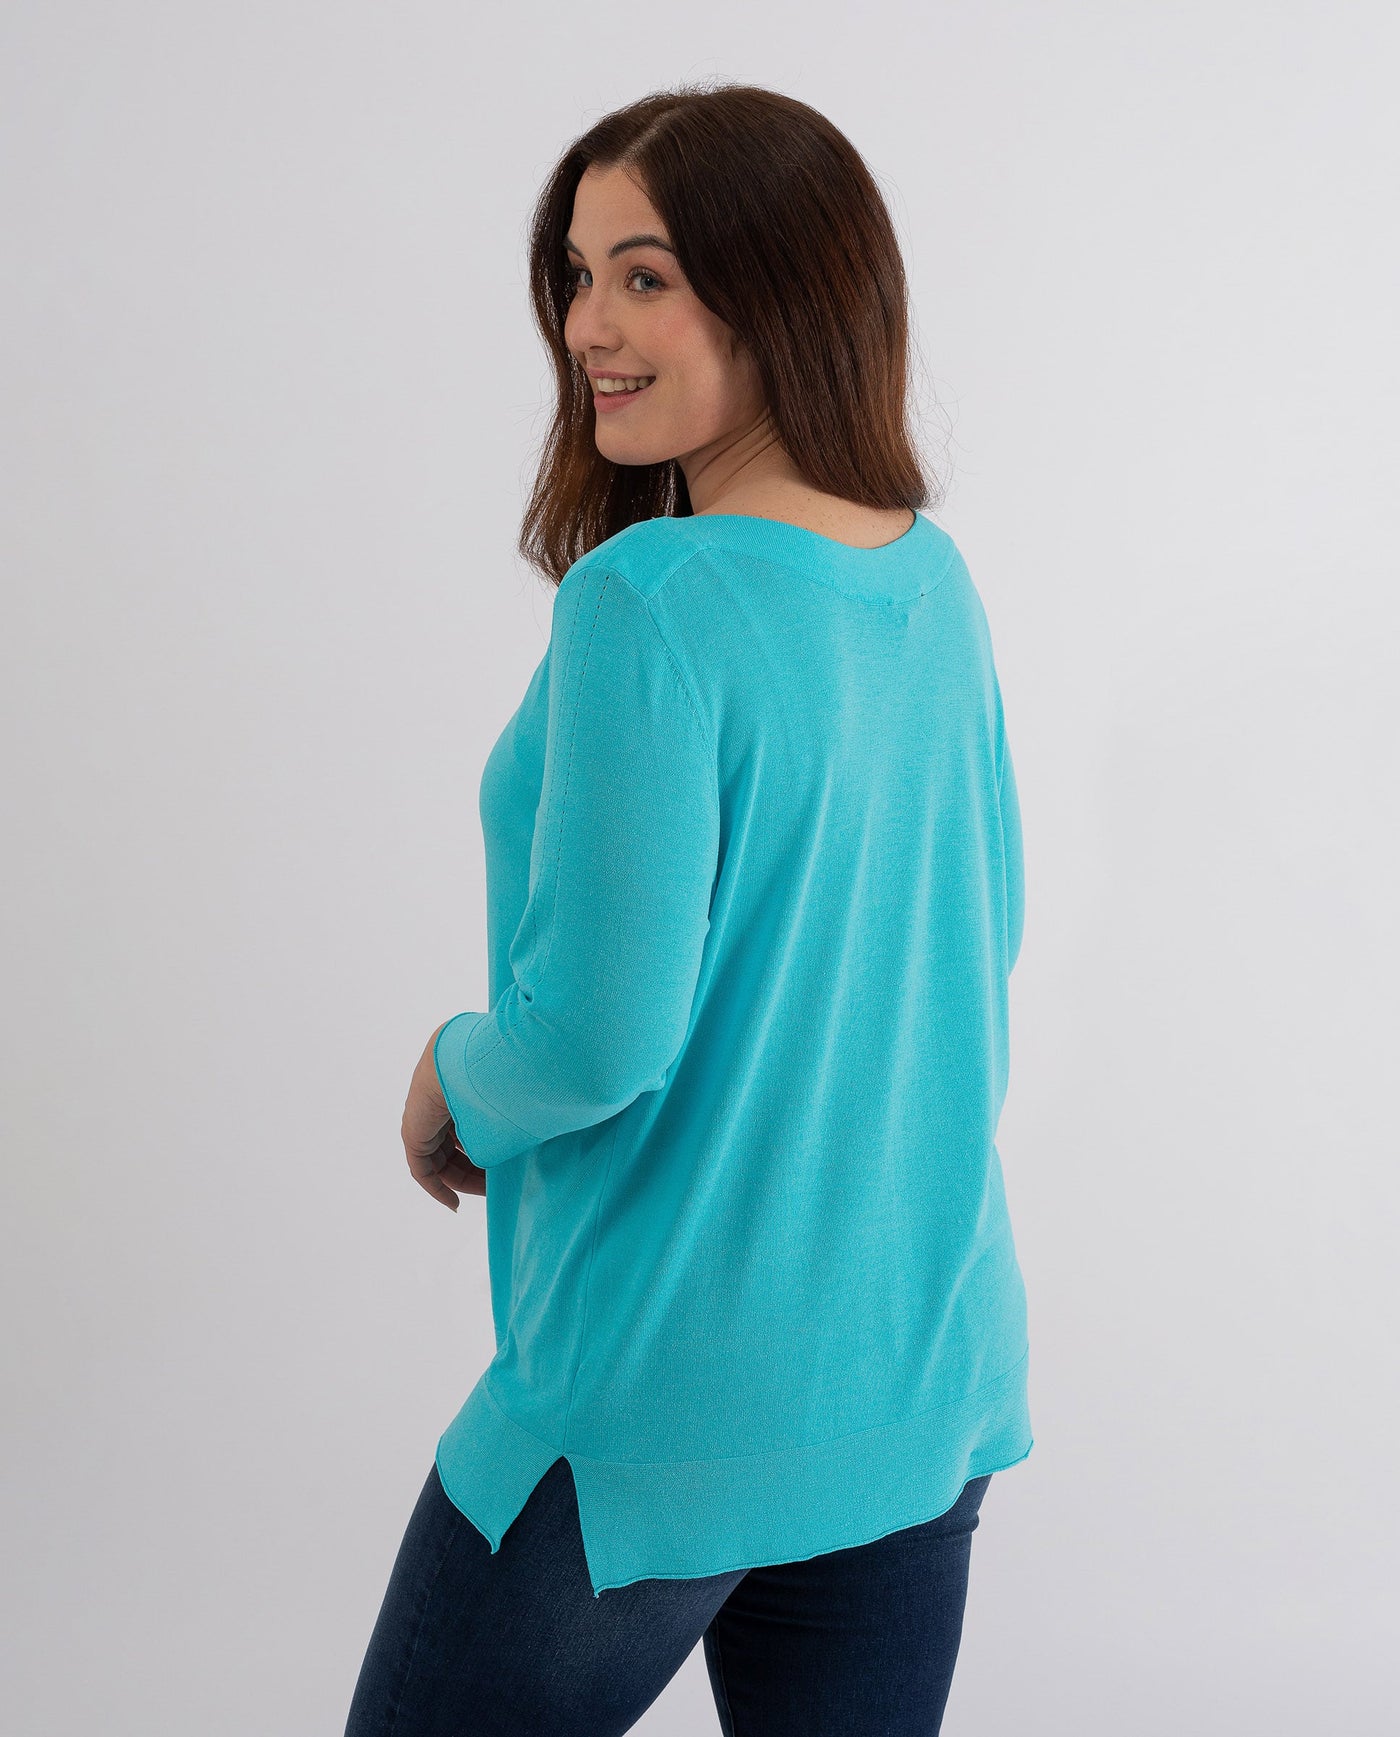 TURQUOISE BOAT NECK SWEATER